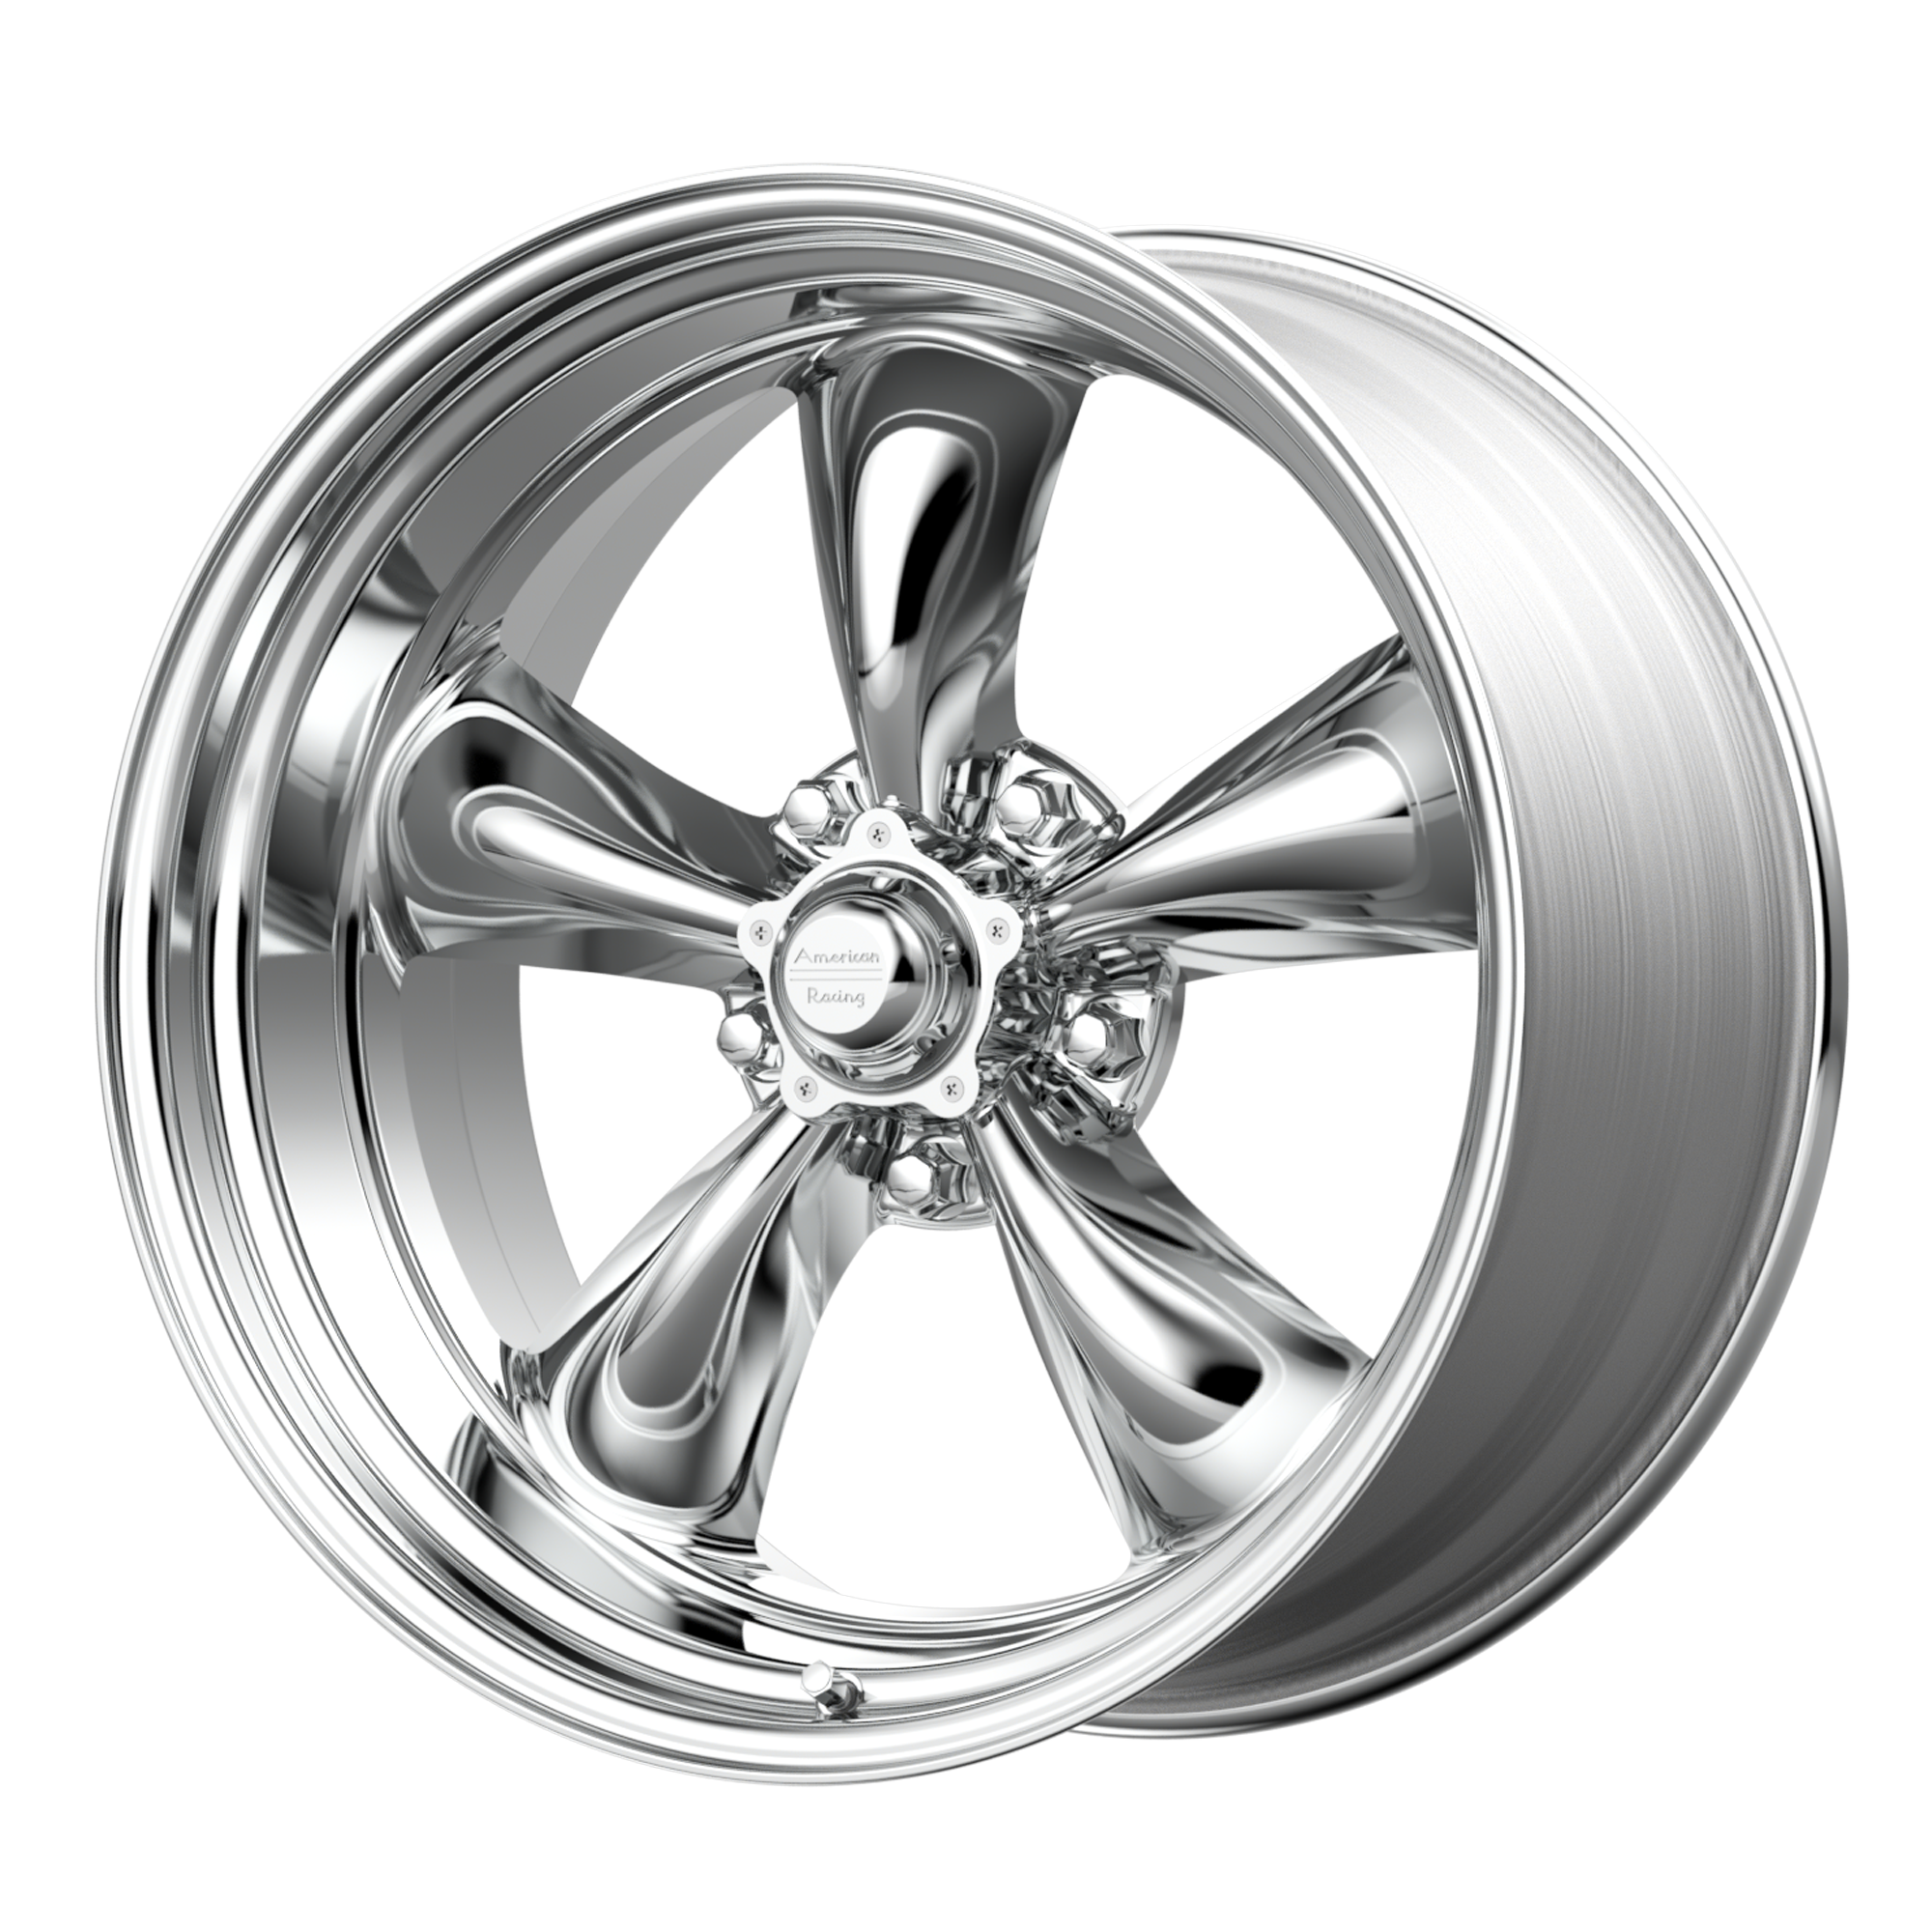 TORQ THRUST II 1 PC 17x8 5x120.65 POLISHED (8 mm) - Tires and Engine Performance